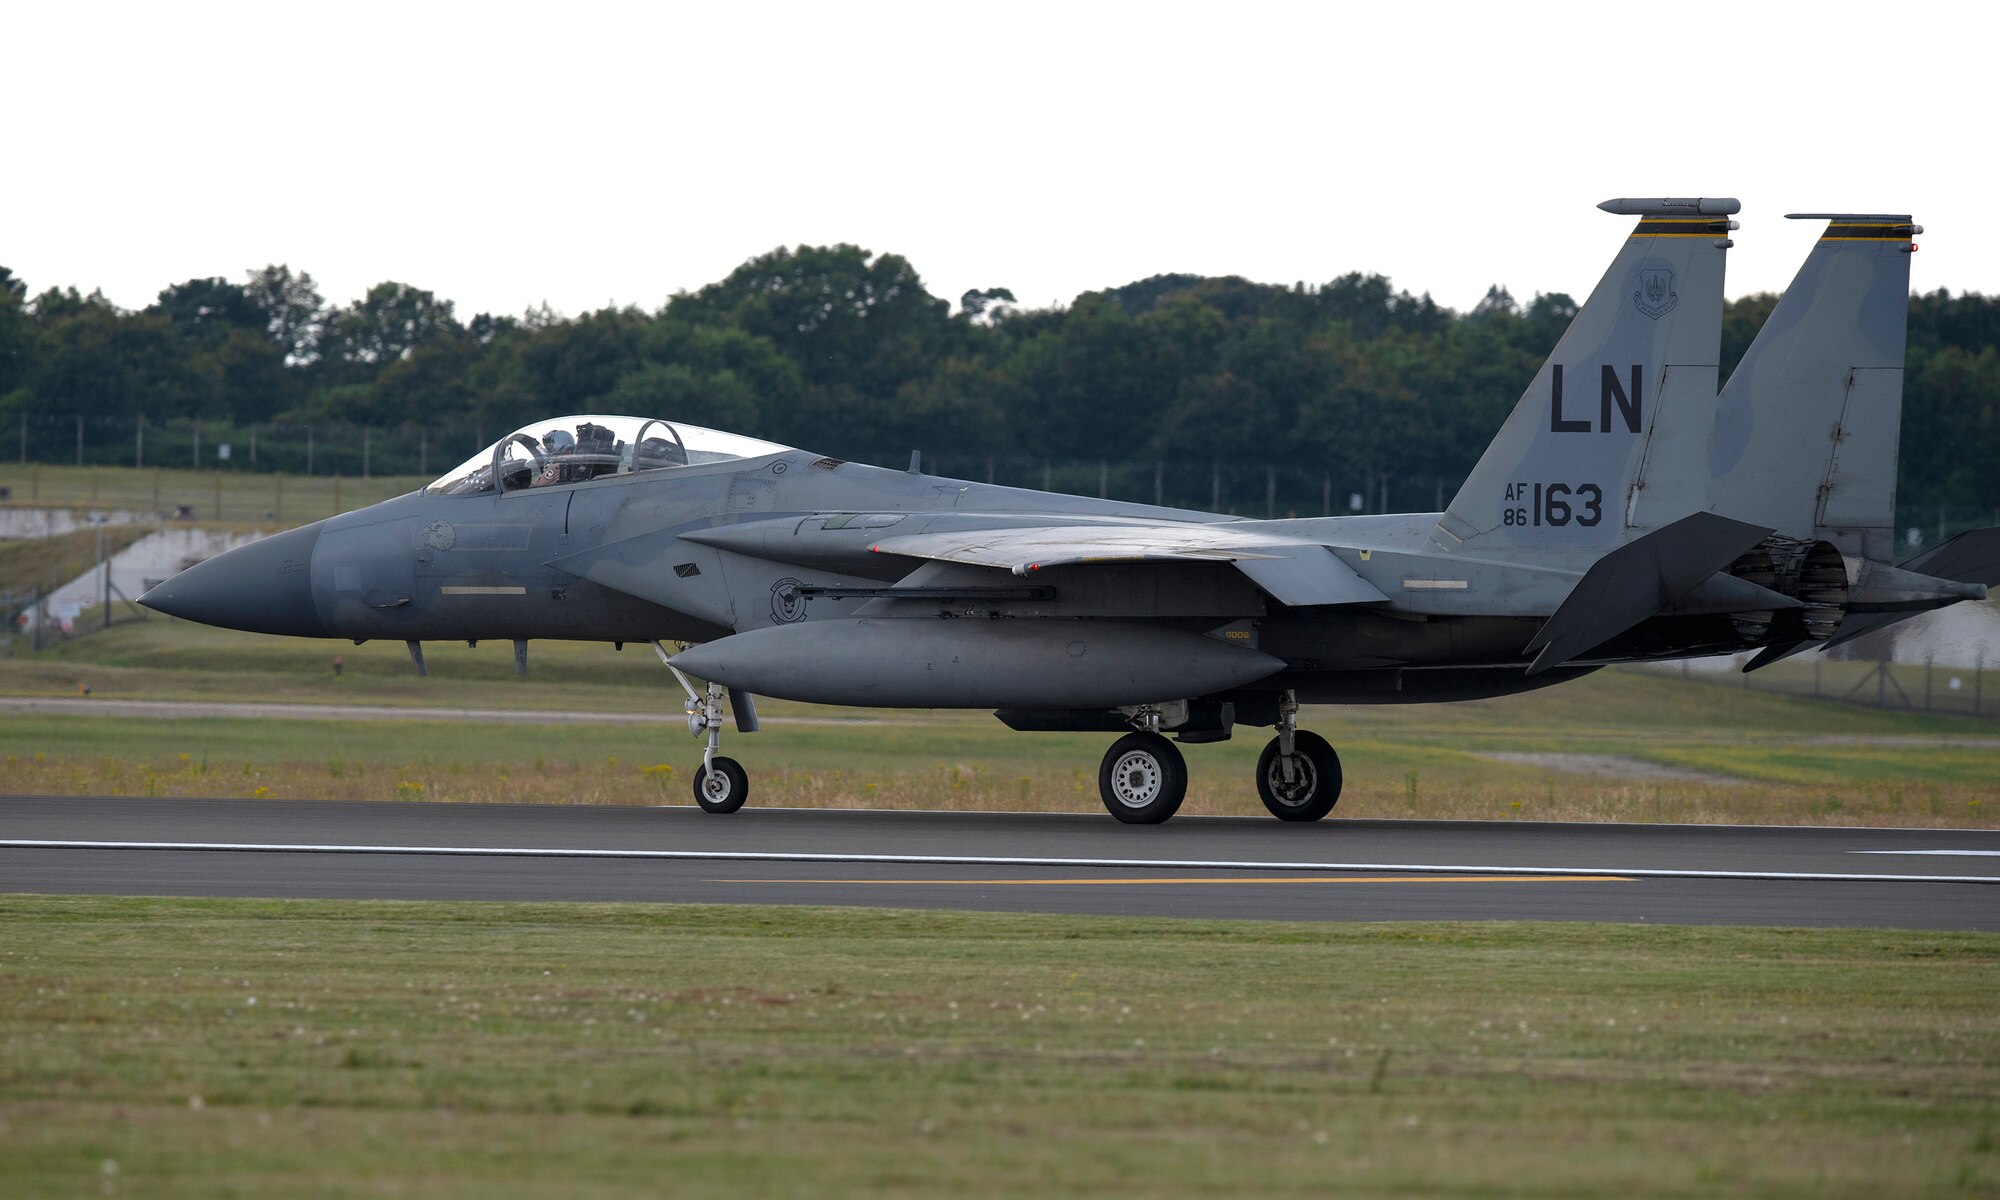 An F-15C Eagle assigned to the 493rd Fighter Squadron returns to Royal Air Force Lakenheath, England, July 12, 2019. Members of the 493rd FS and 748th Aircraft Maintenance Squadron were deployed to an undisclosed location for six months. (U.S. Air Force photo by Senior Airman Malcolm Mayfield)